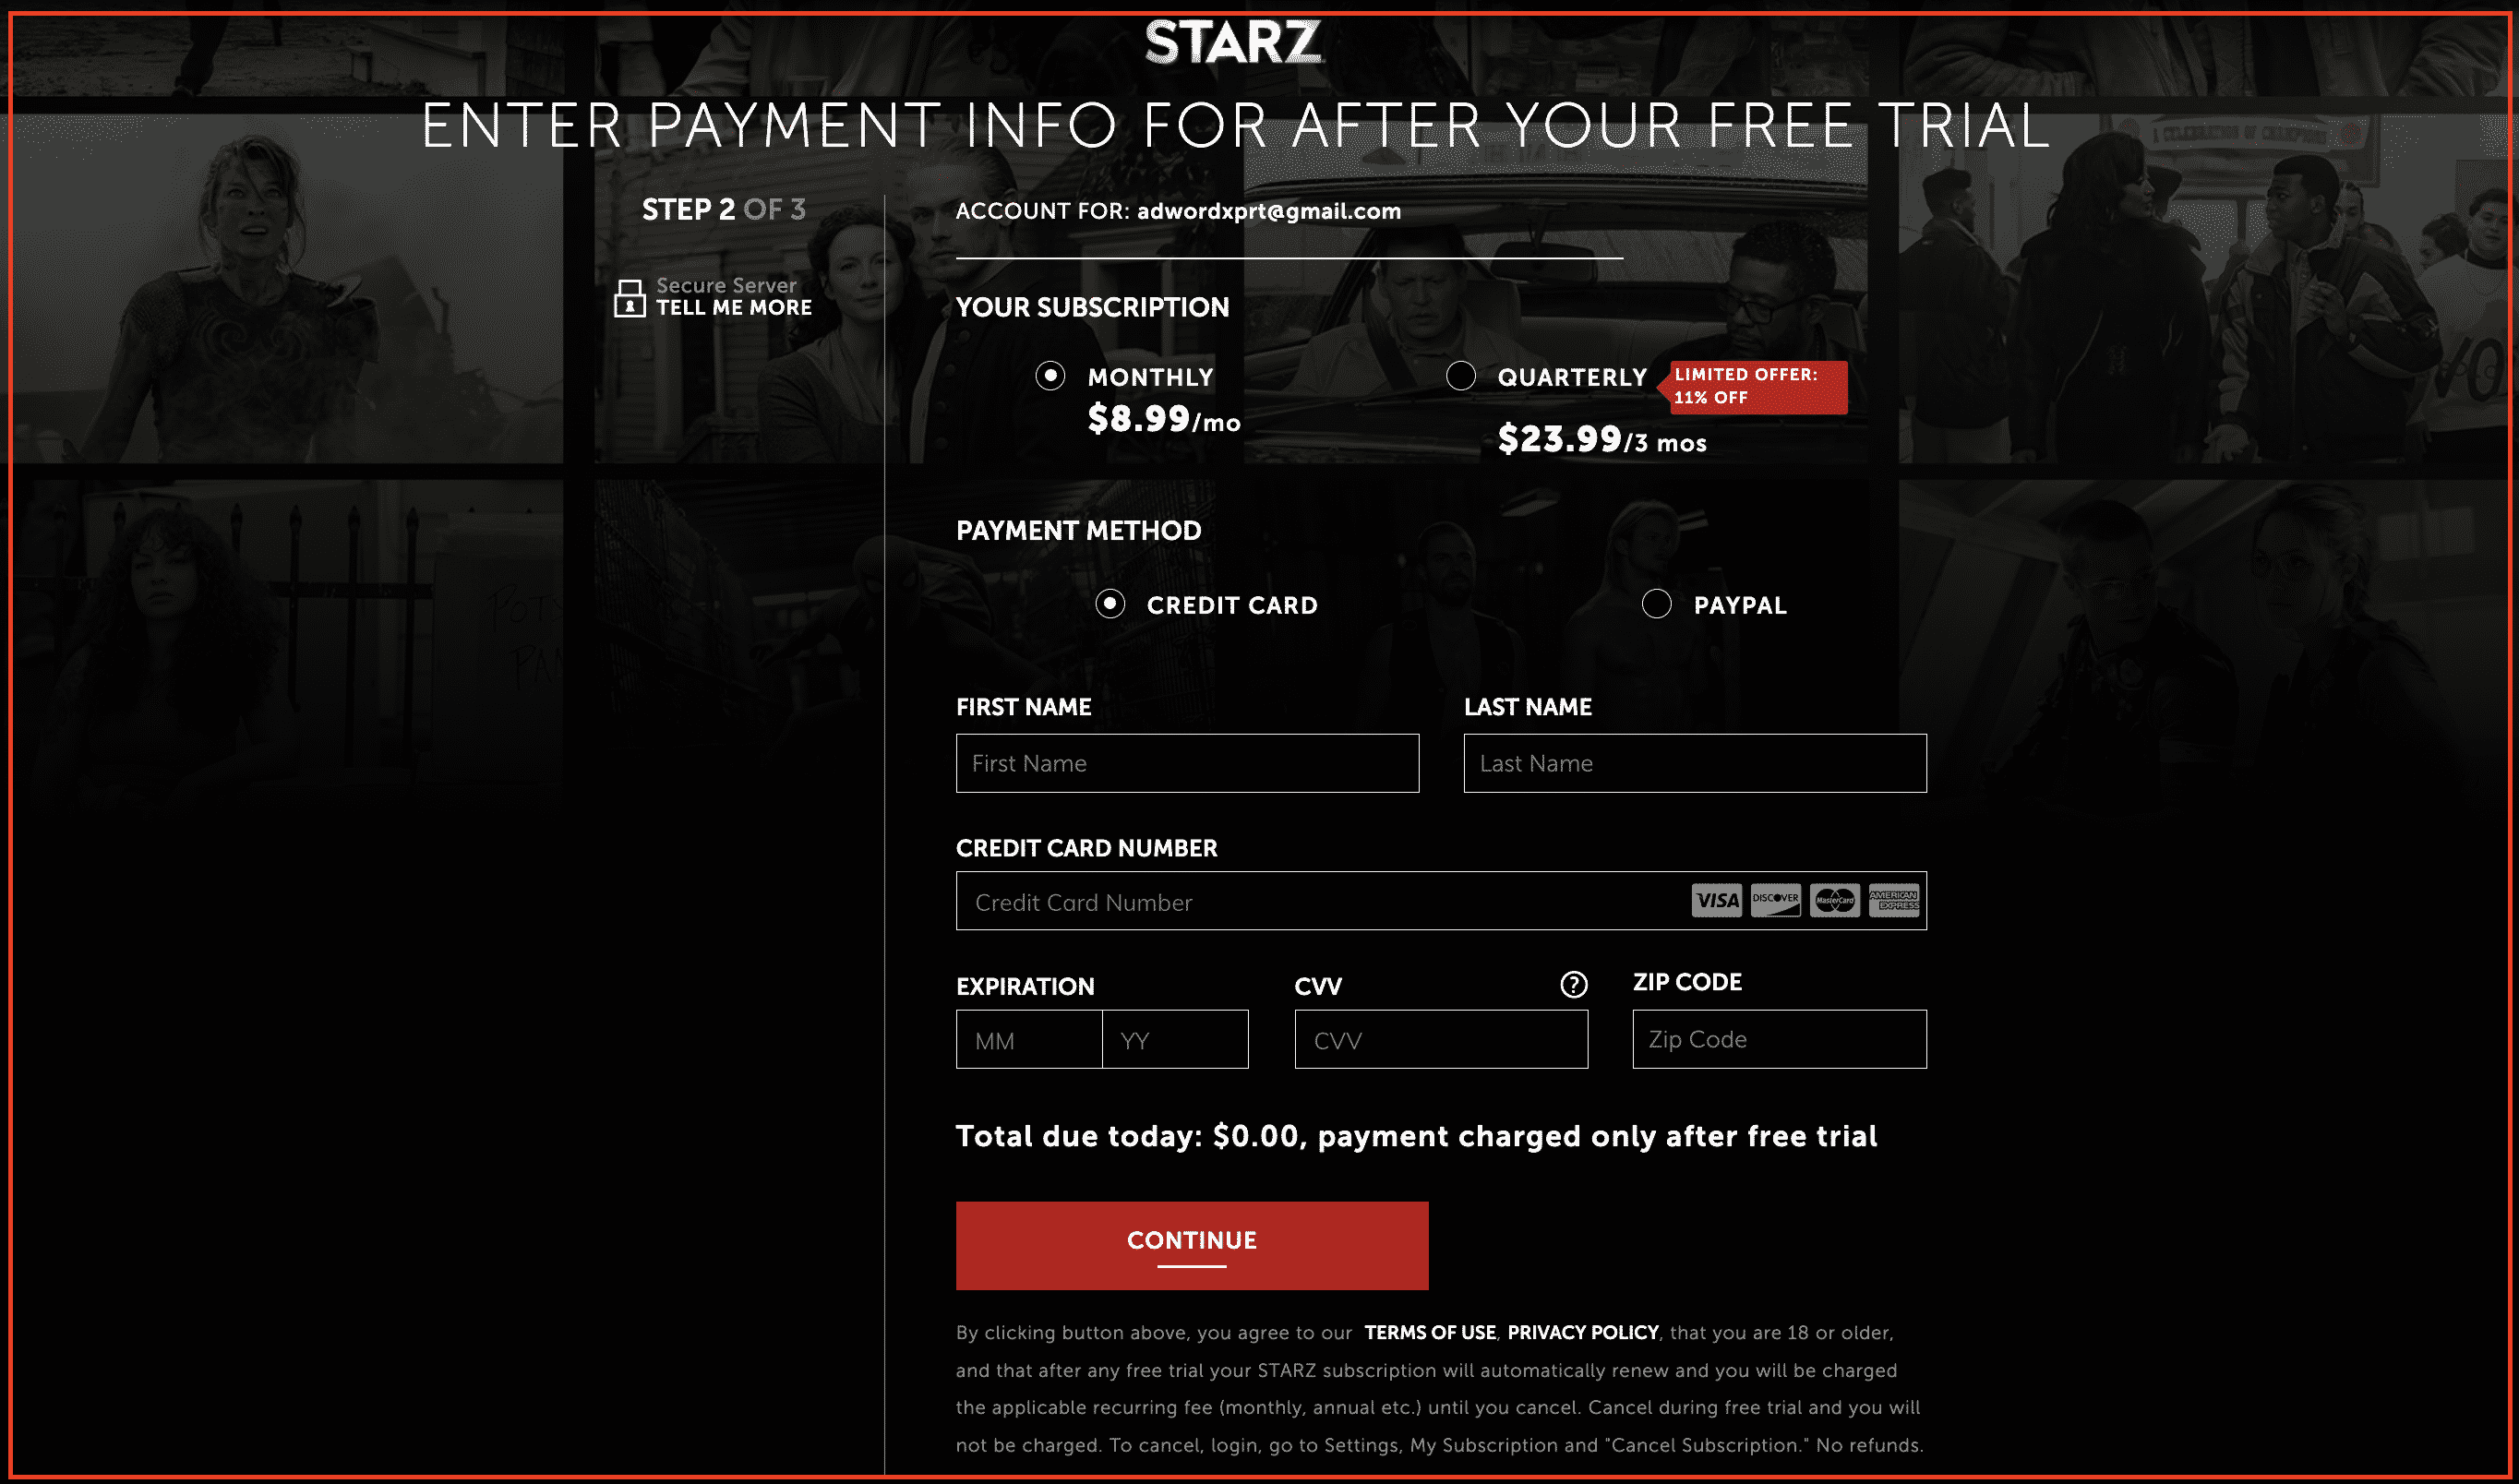 Starz free trial payment details